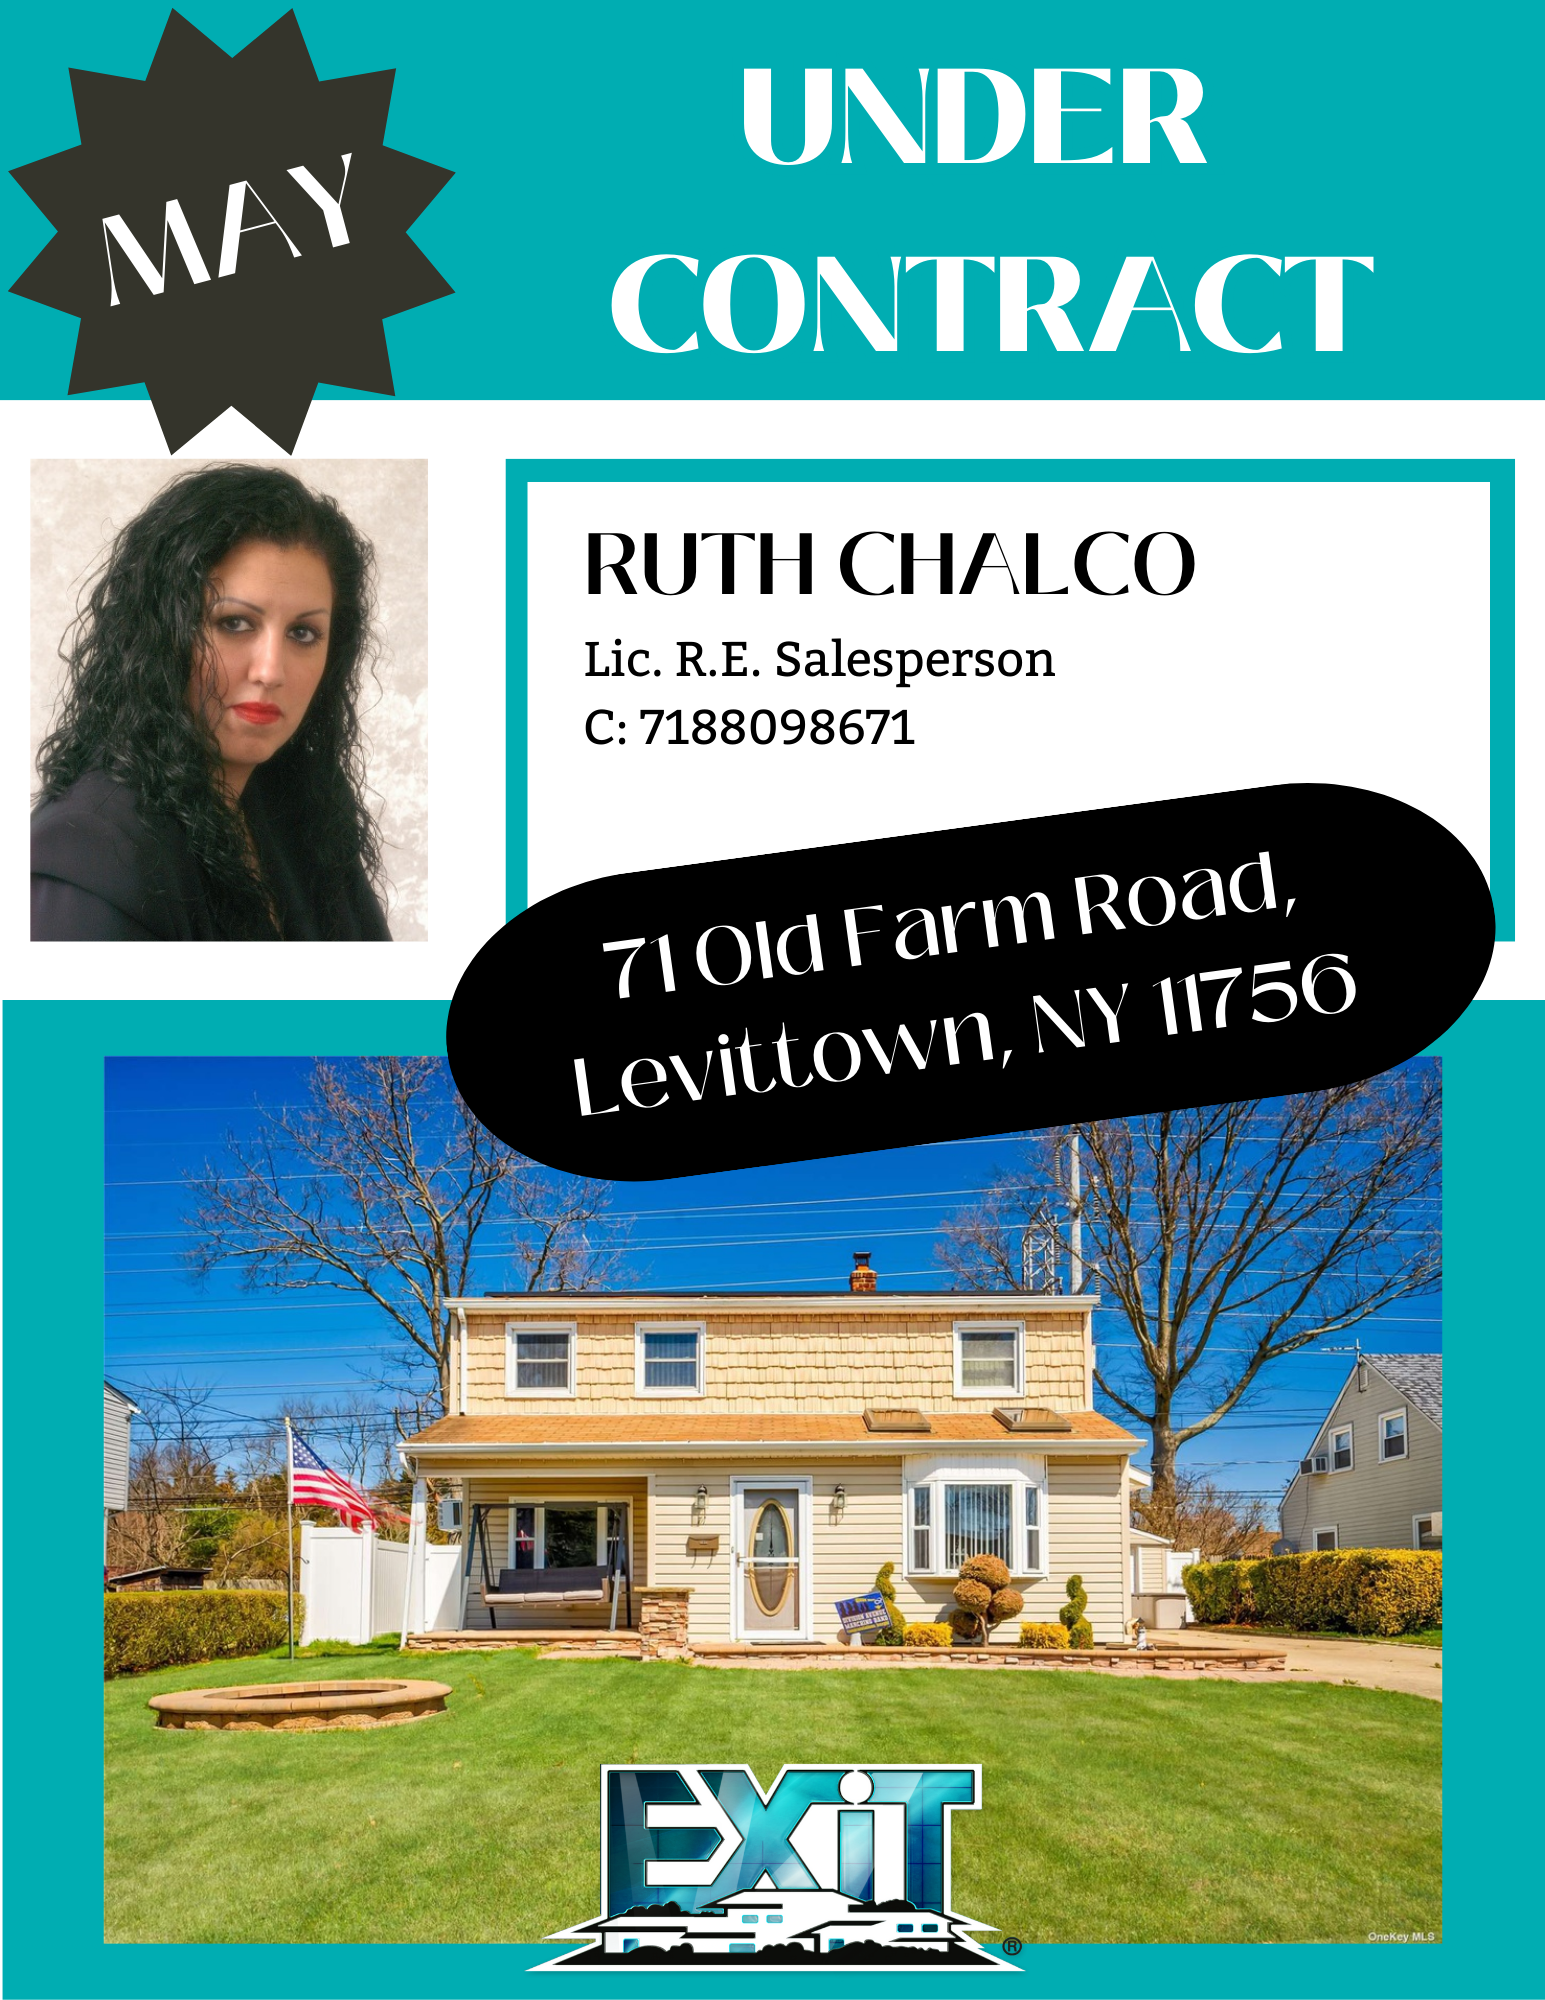 Under Contract by Ruth Chalco